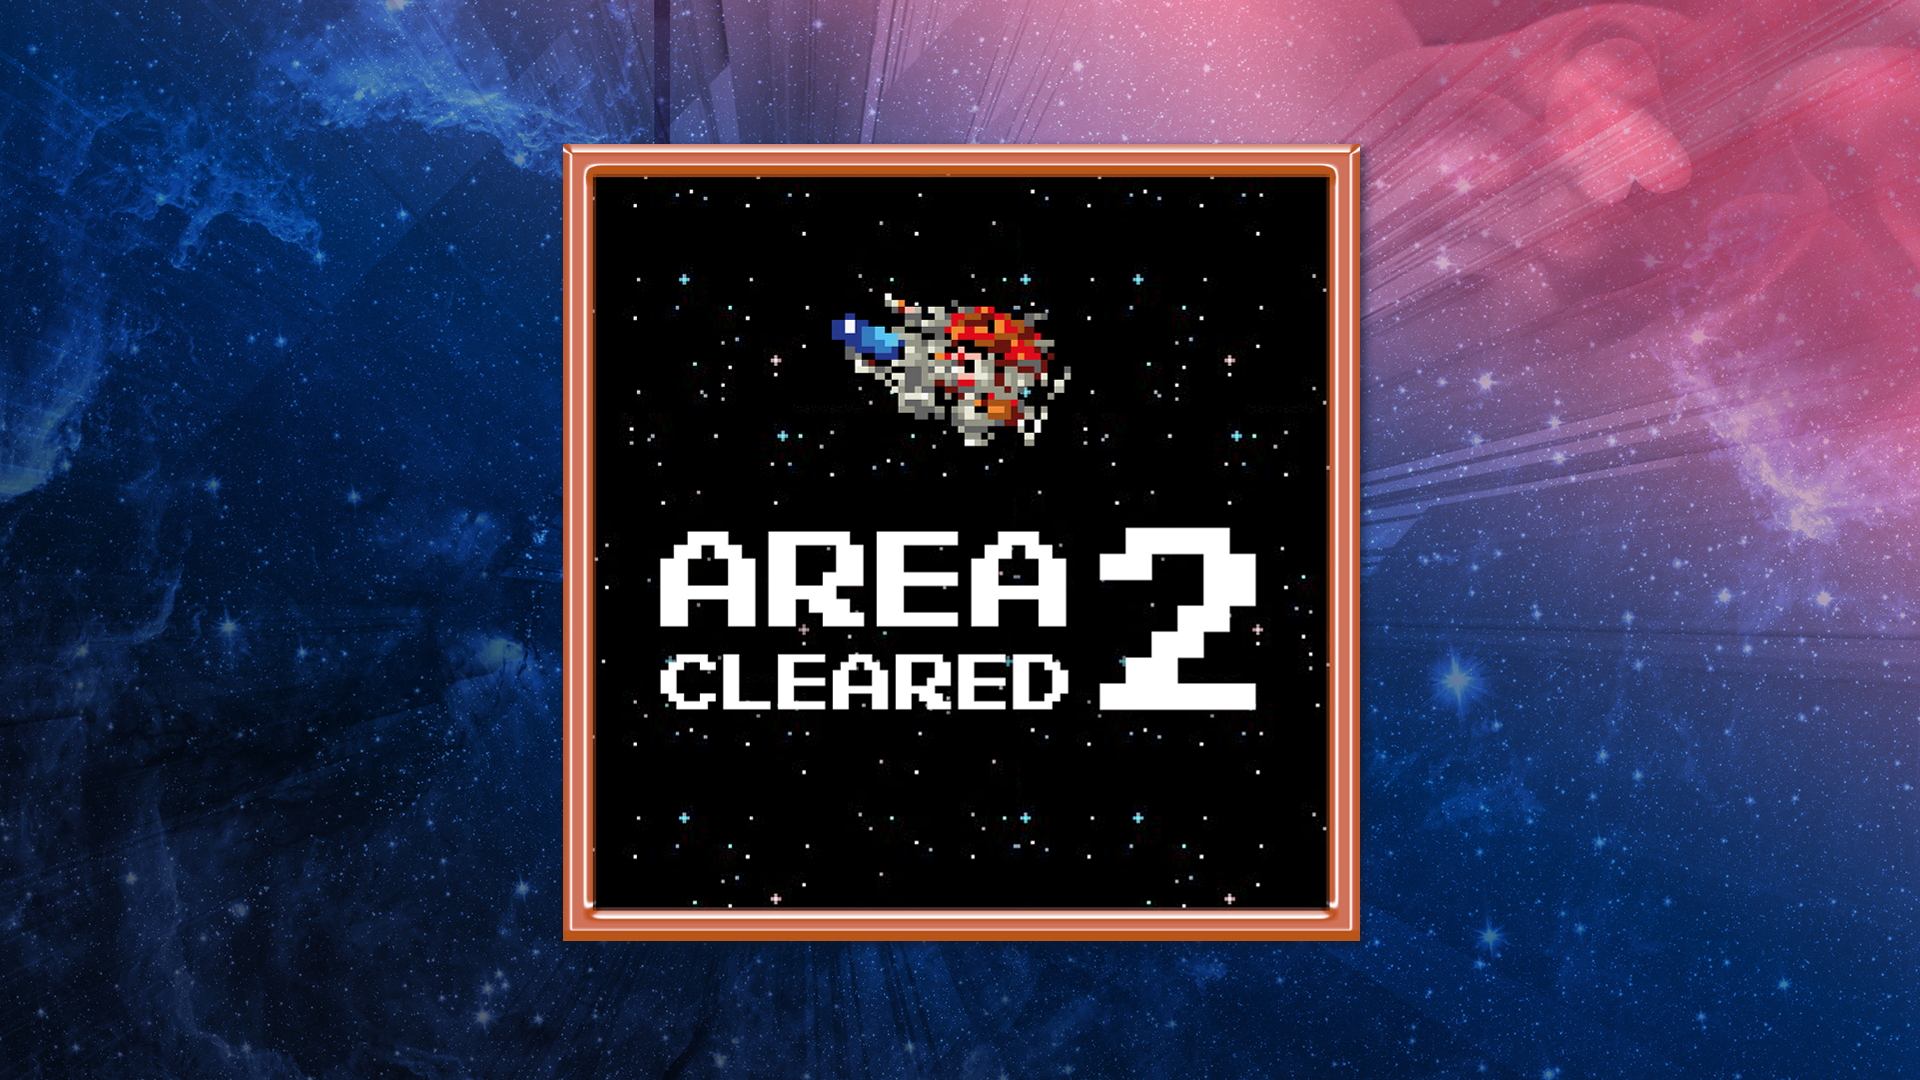 Icon for Image Fight (Arcade) - Area 2 Cleared